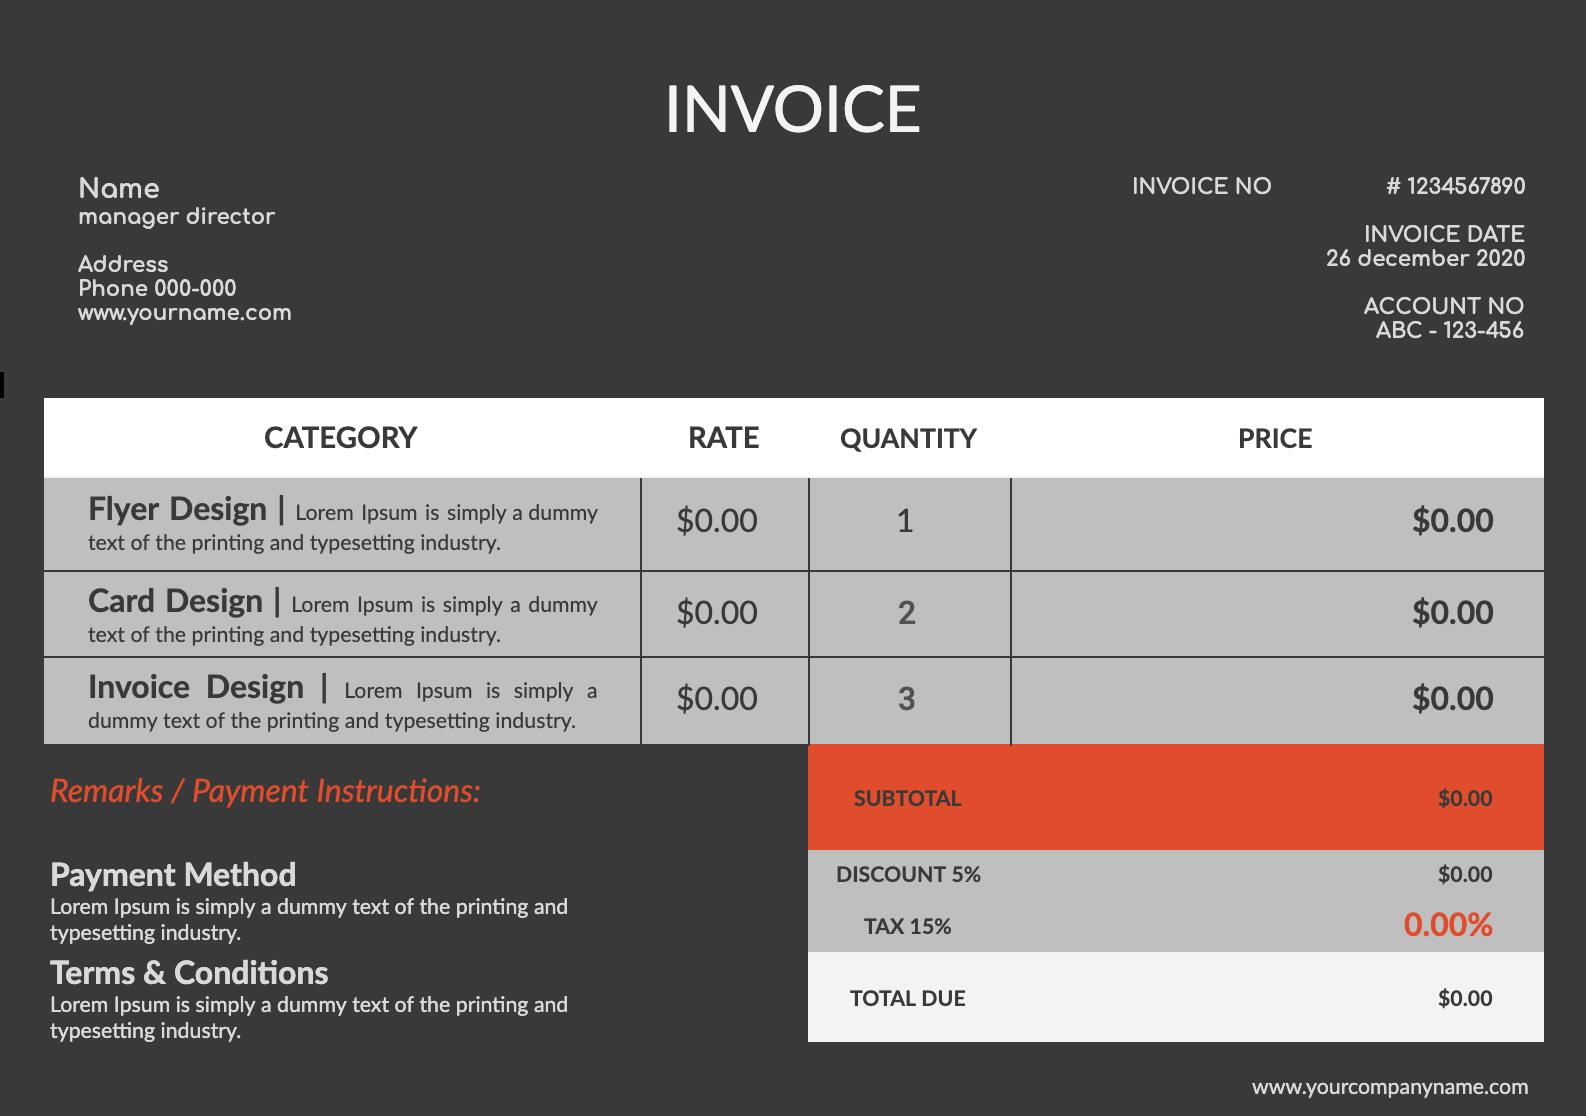 Invoice Template from thegoodocs.com